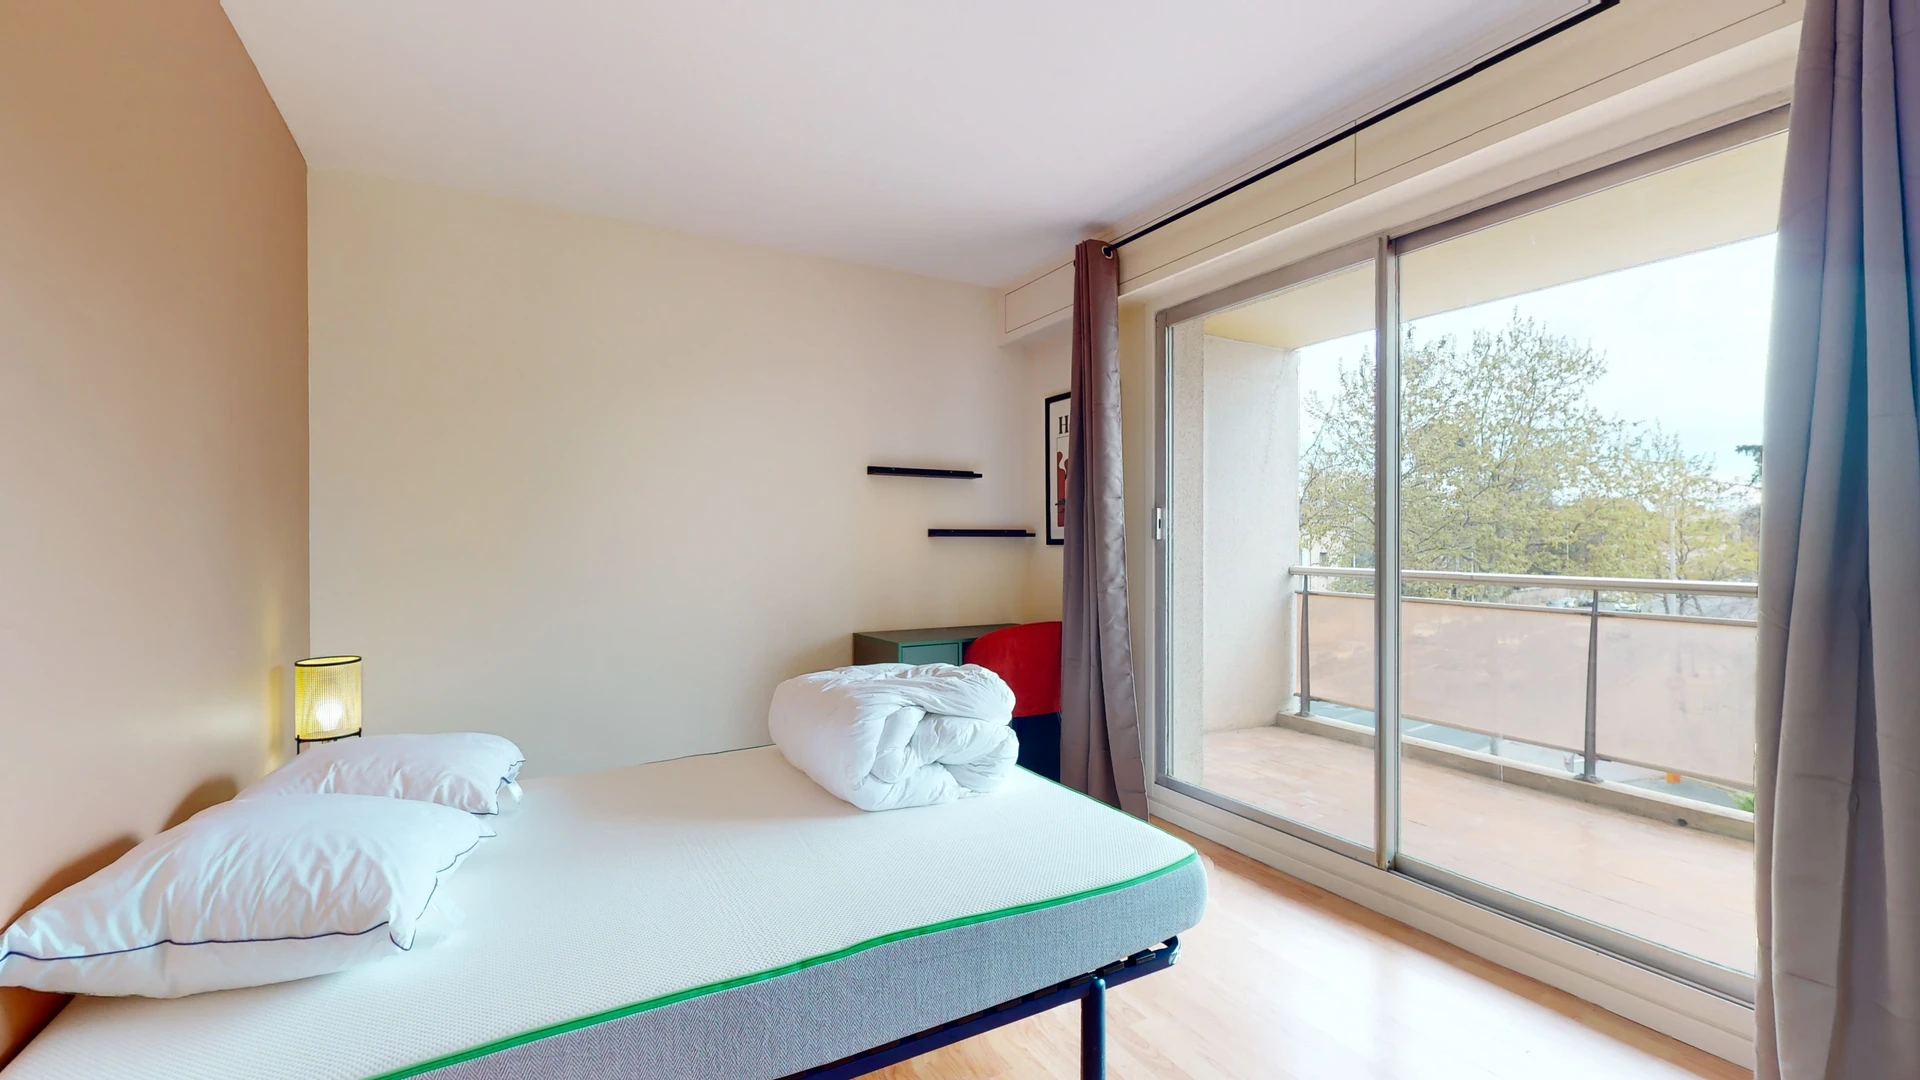 Renting rooms by the month in montpellier